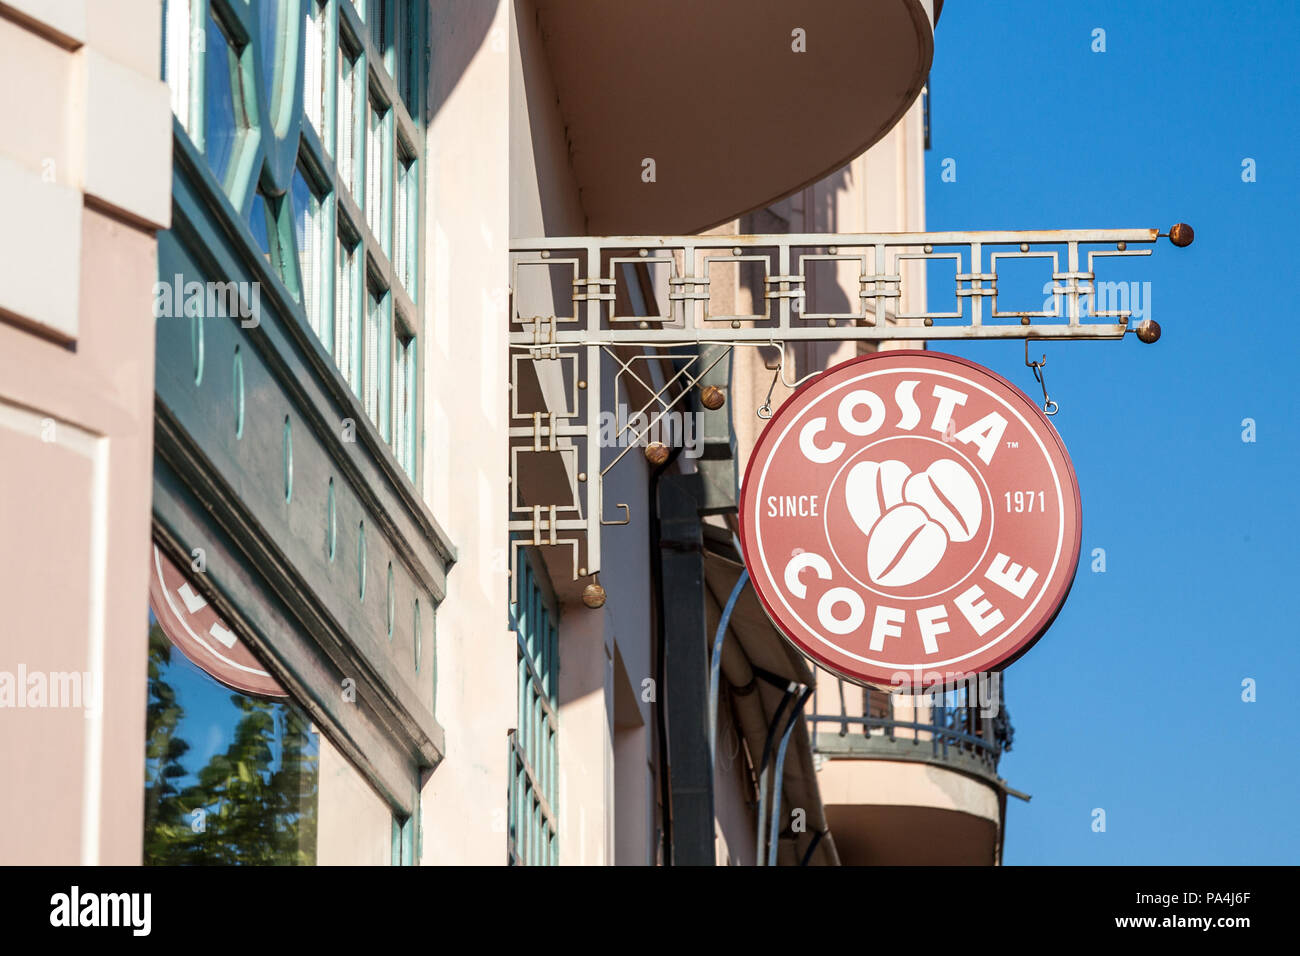 SZEGED, HUNGARY - JULY 2, 2018: Costa Coffee Logo on their main shop and coffee house in Szeged. Costa Coffee is a British multinational coffeehouse c Stock Photo